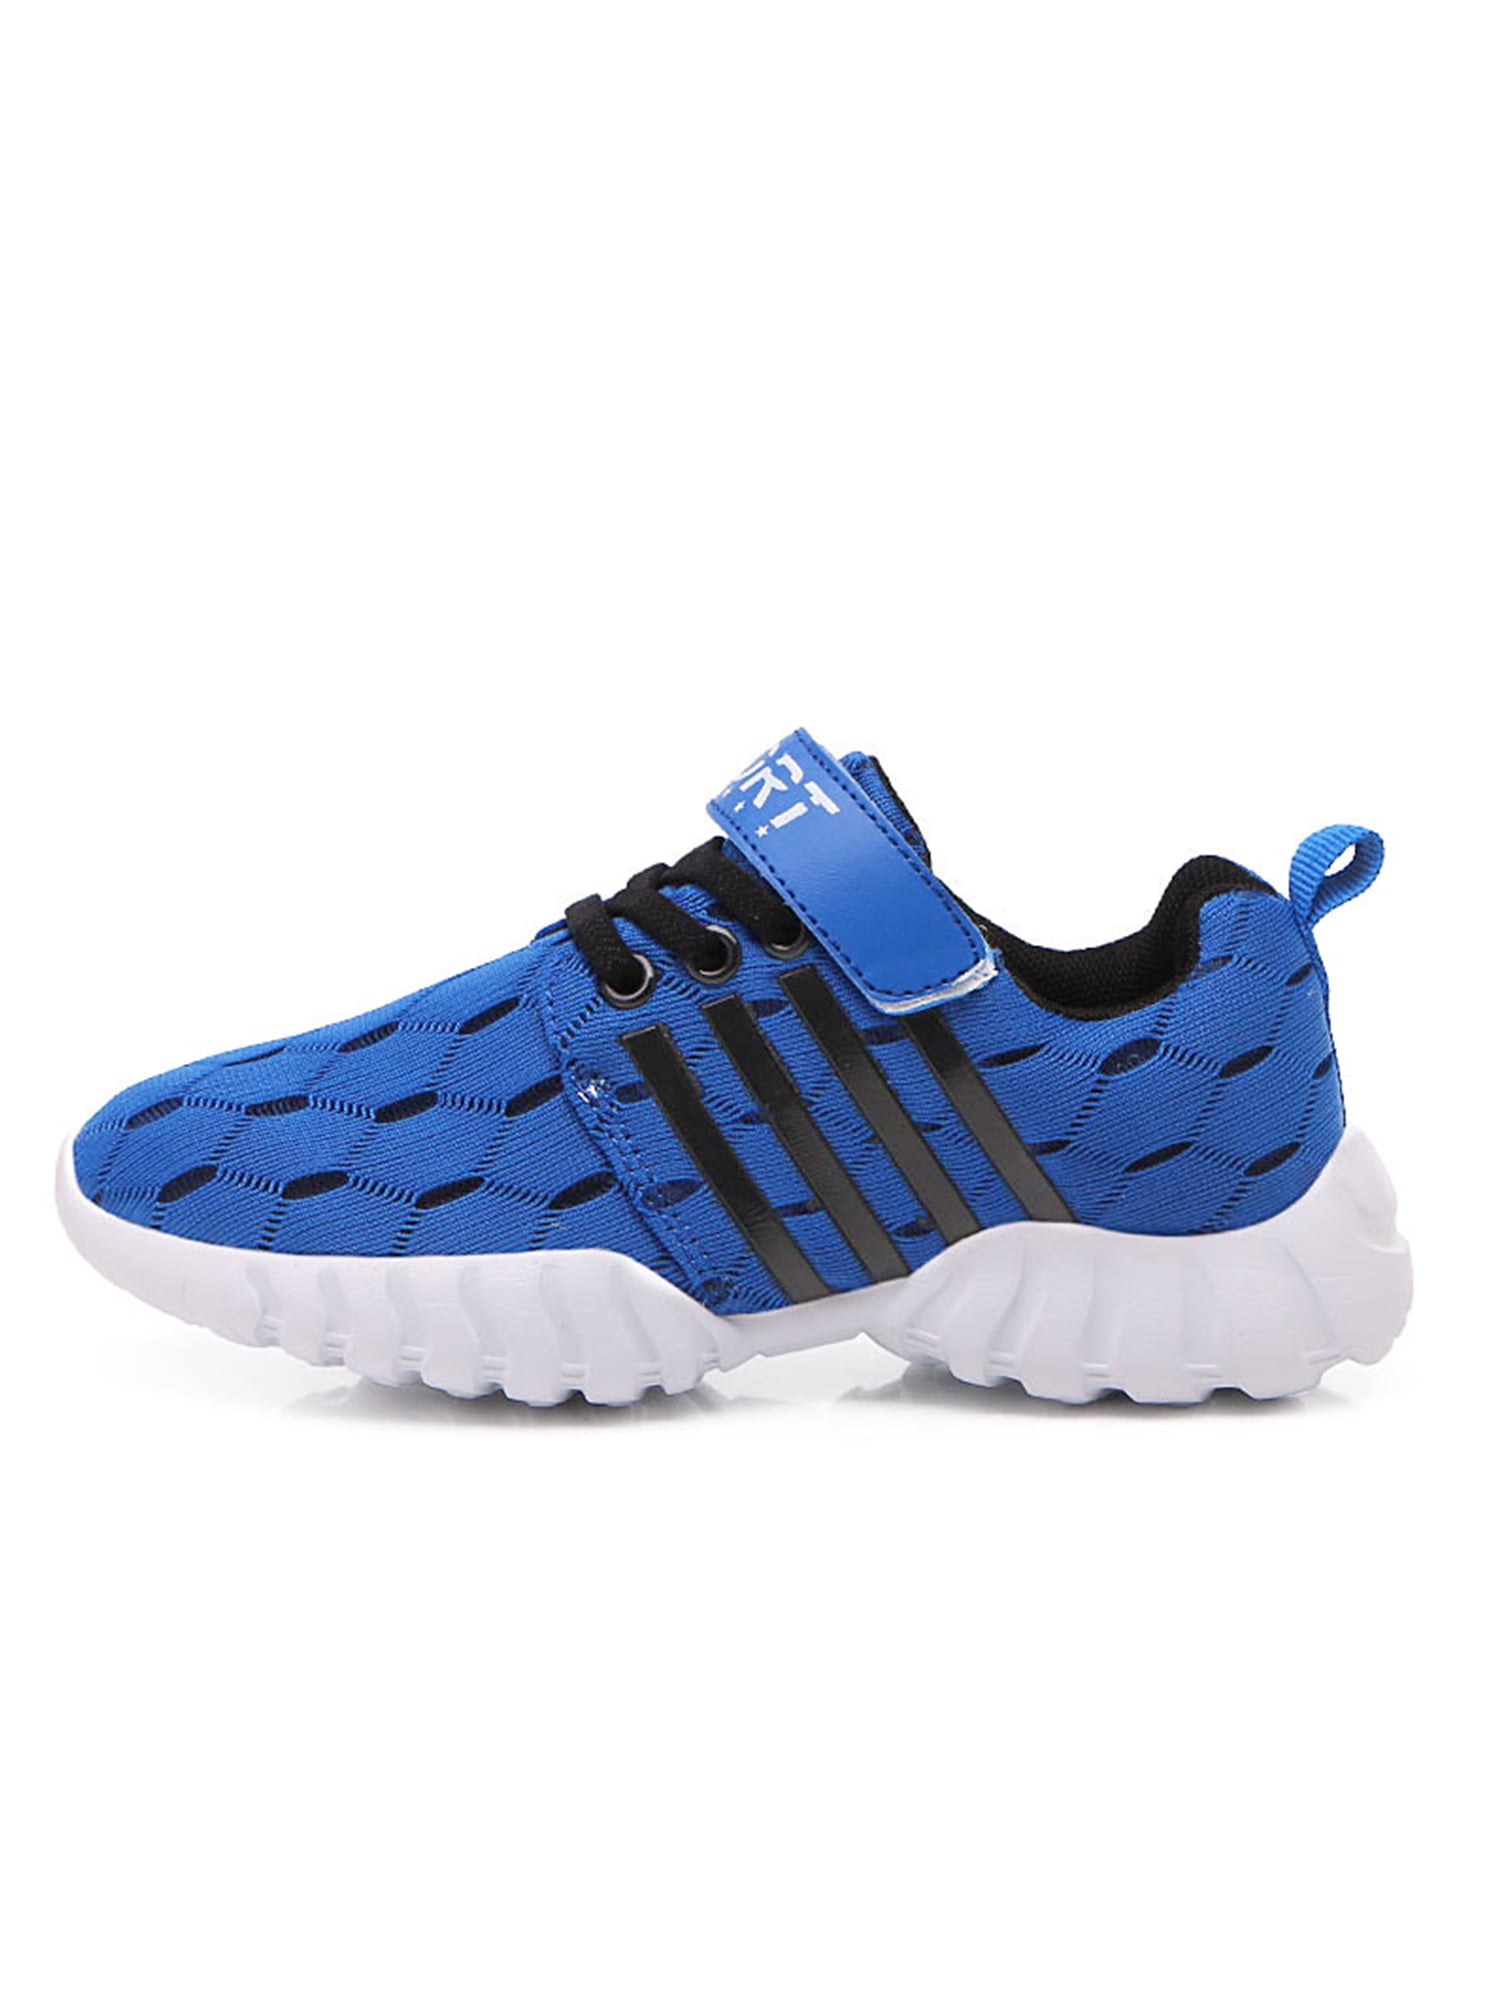 Kids Tennis Shoes Breathable Running Shoes Walking Shoes Fashion Sneakers Boy 